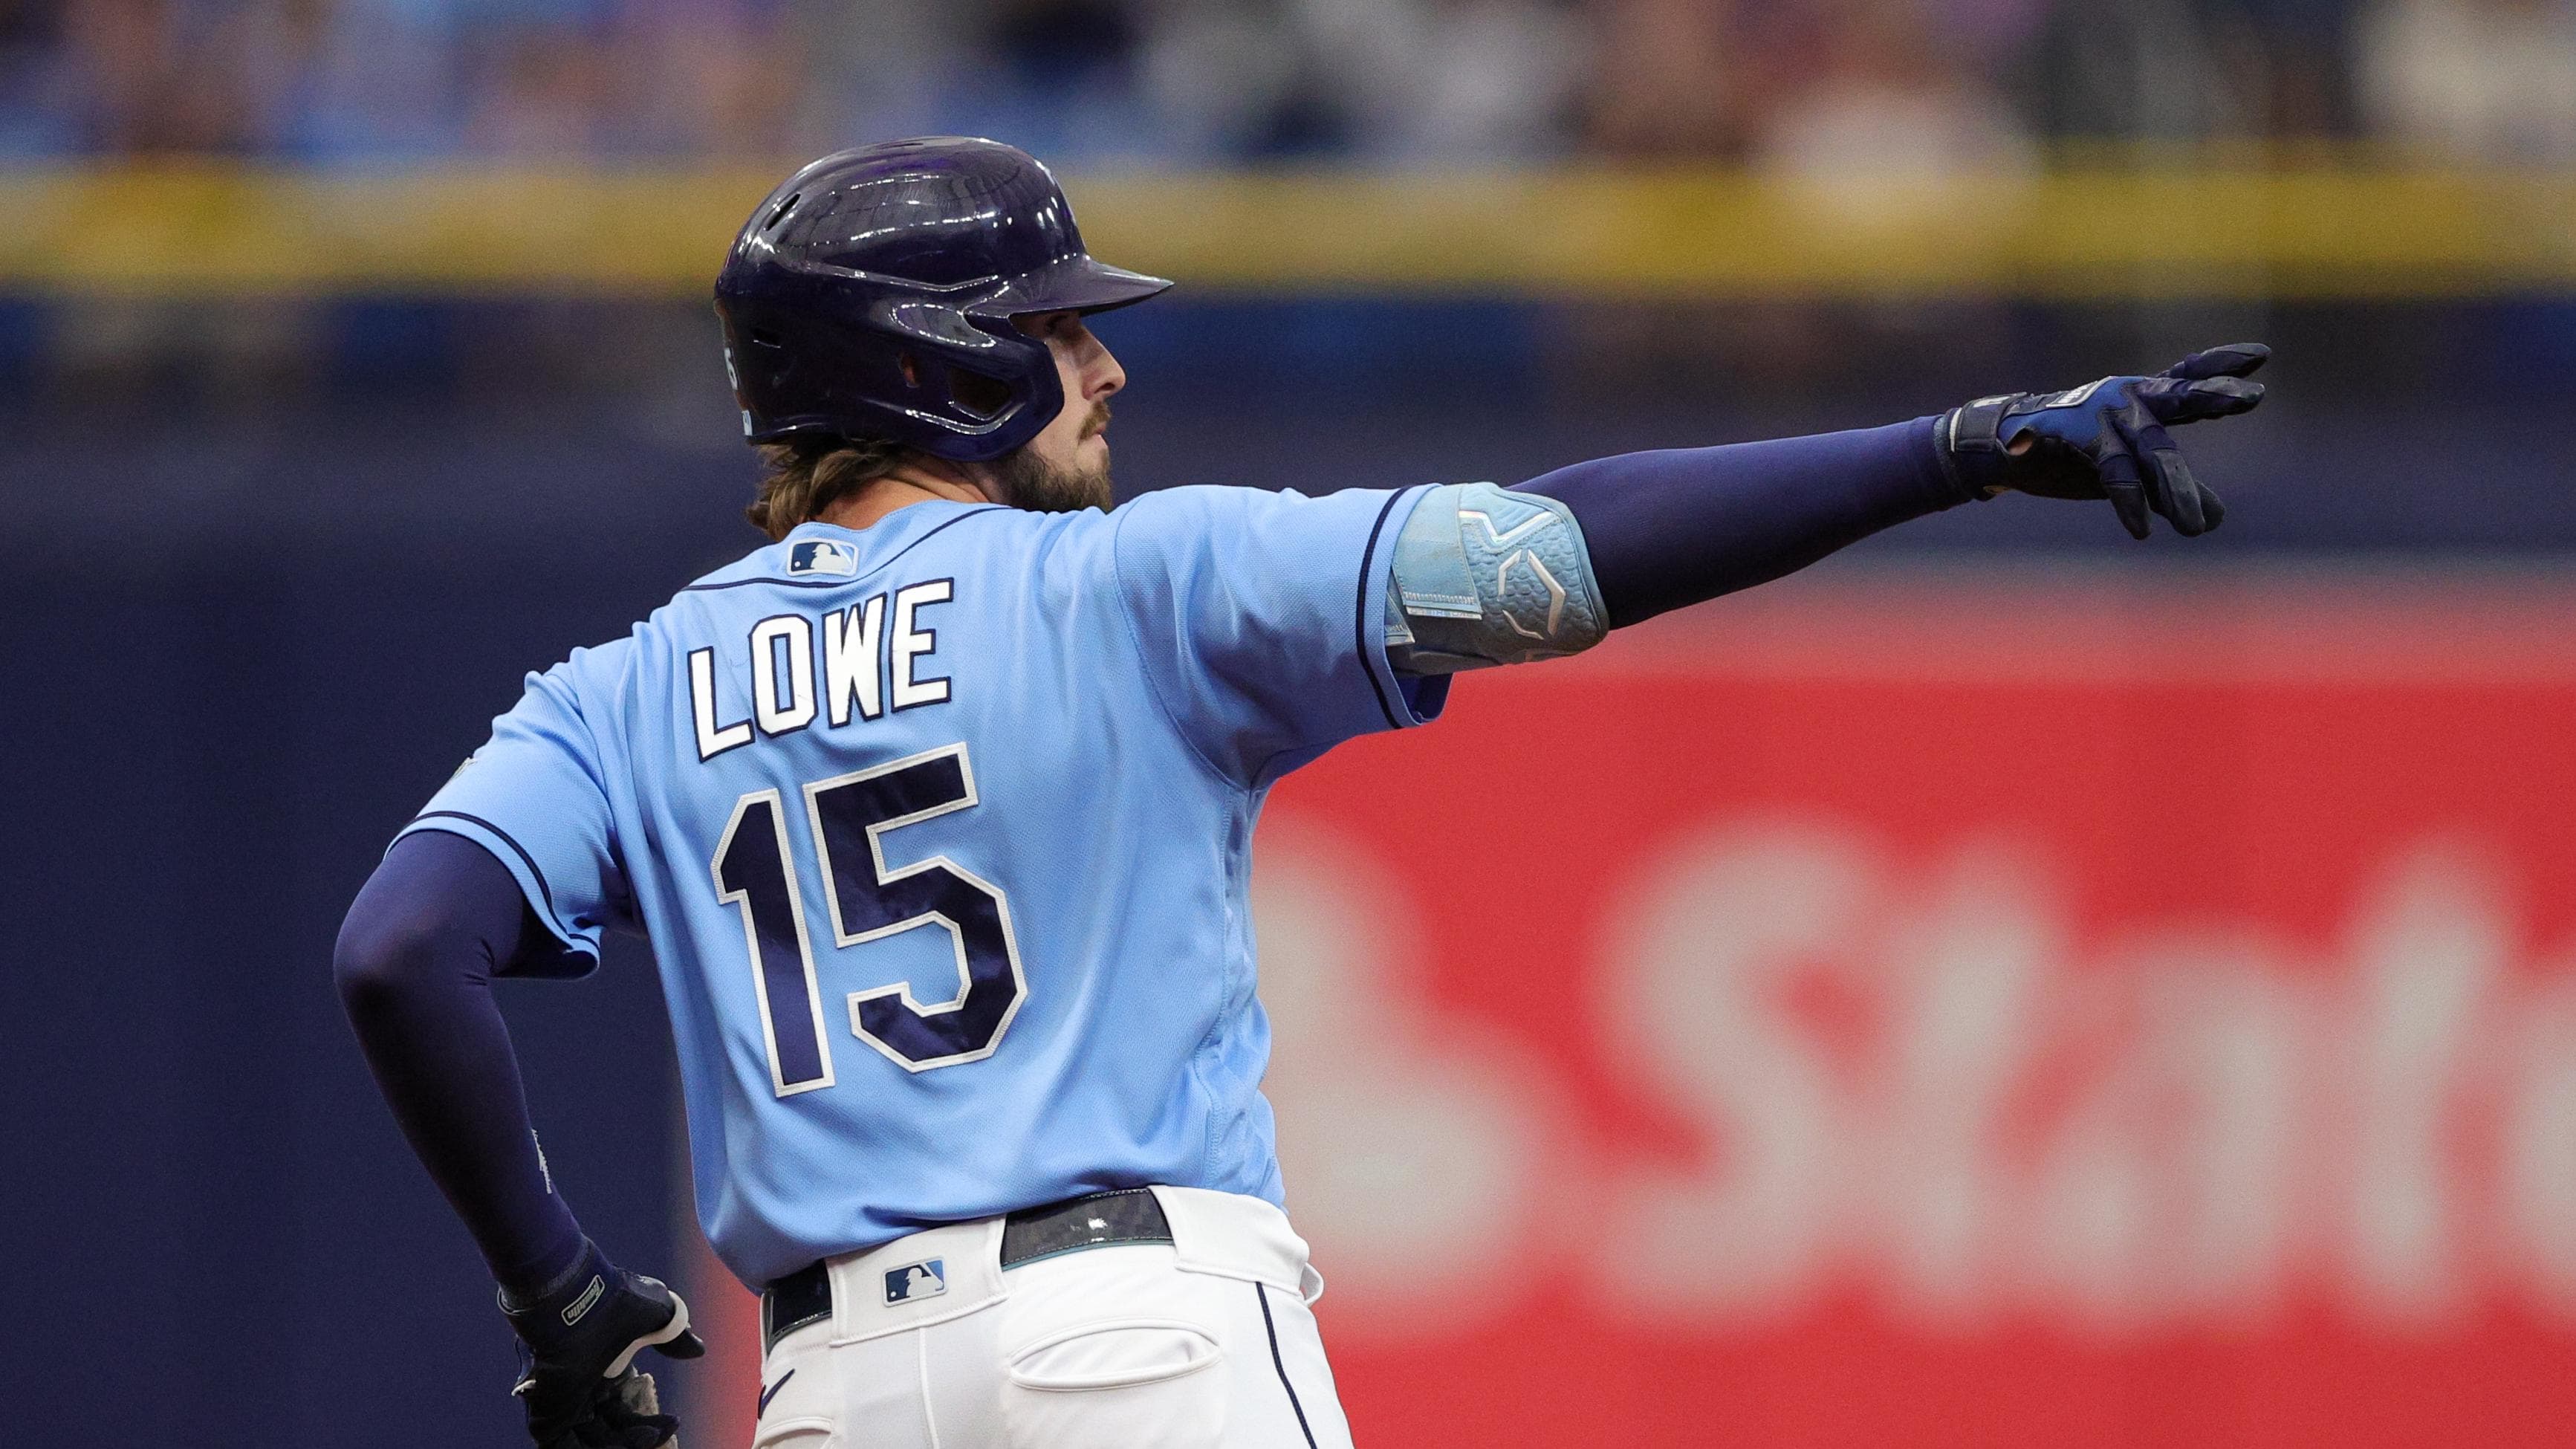 Tampa Bay Rays Activate Outfielder Josh Lowe Off Injured List to Make Season Debut